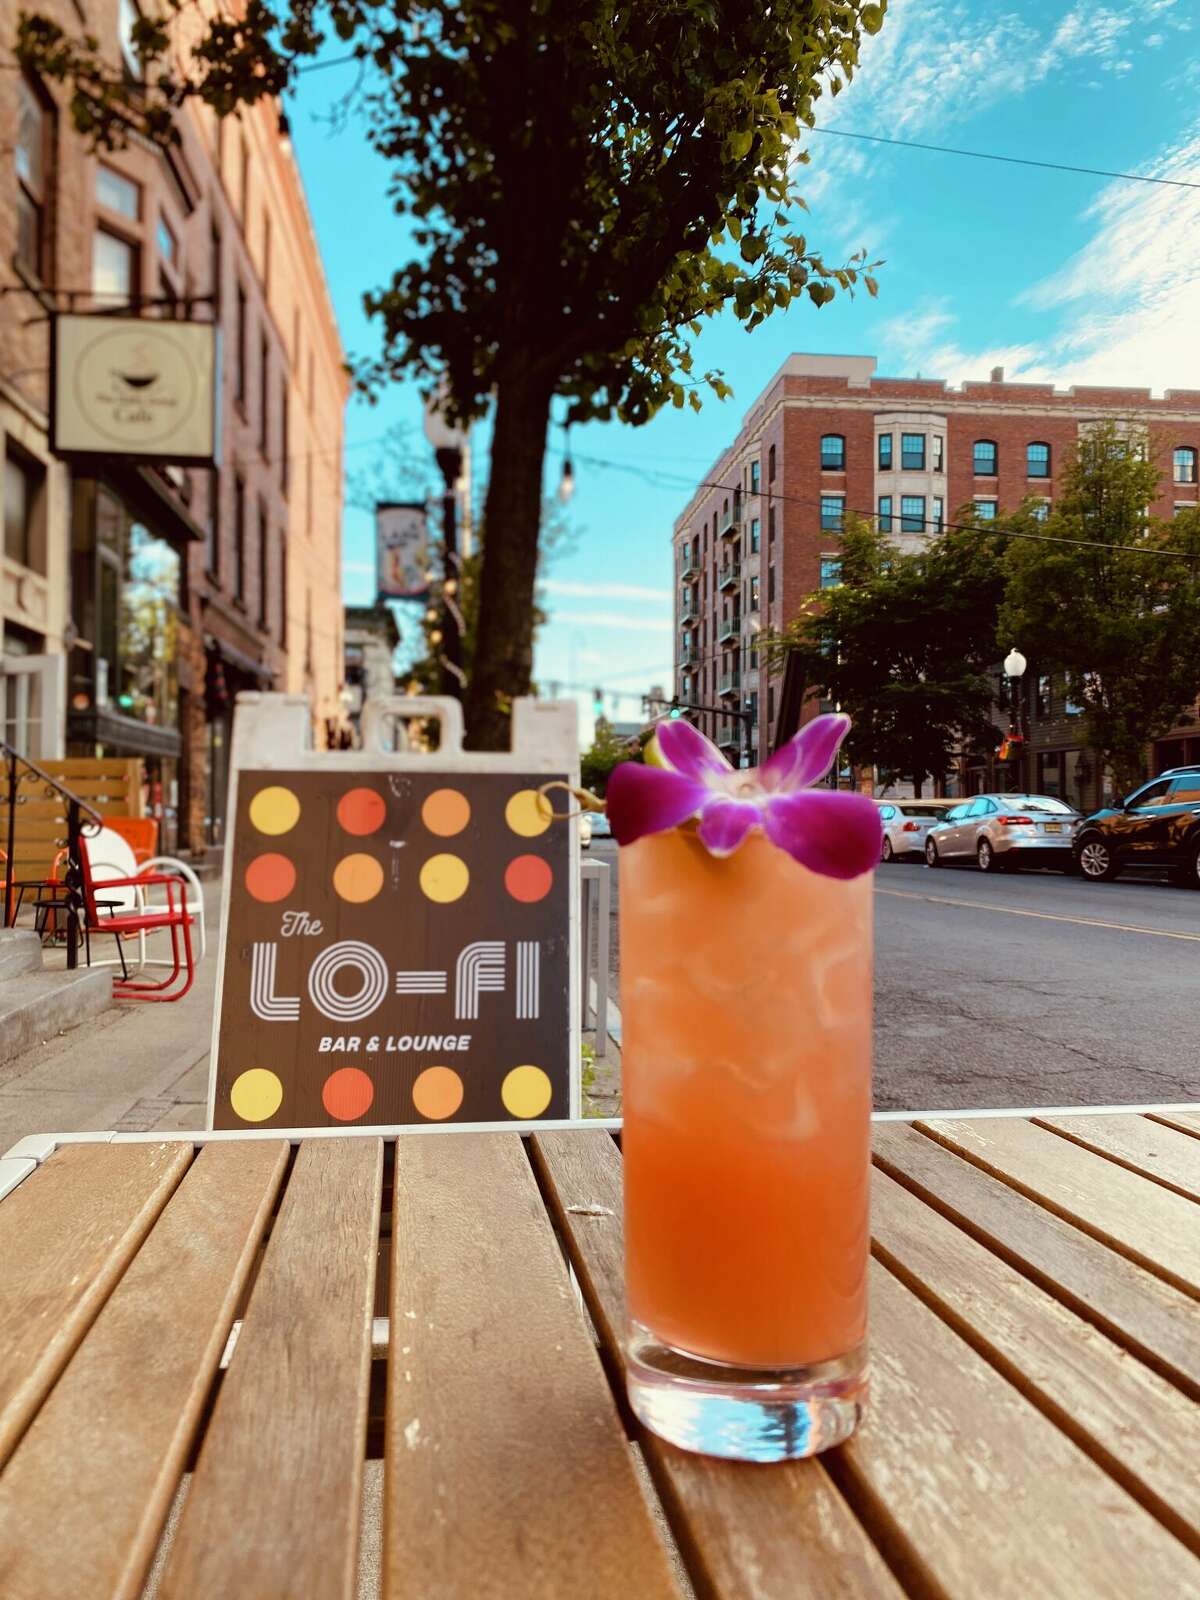 The Watermelon Alarm Clock from the LoFi Bar & Lounge in Albany takes on the flavors of a slice of the fruit, dusted with tajin spice.